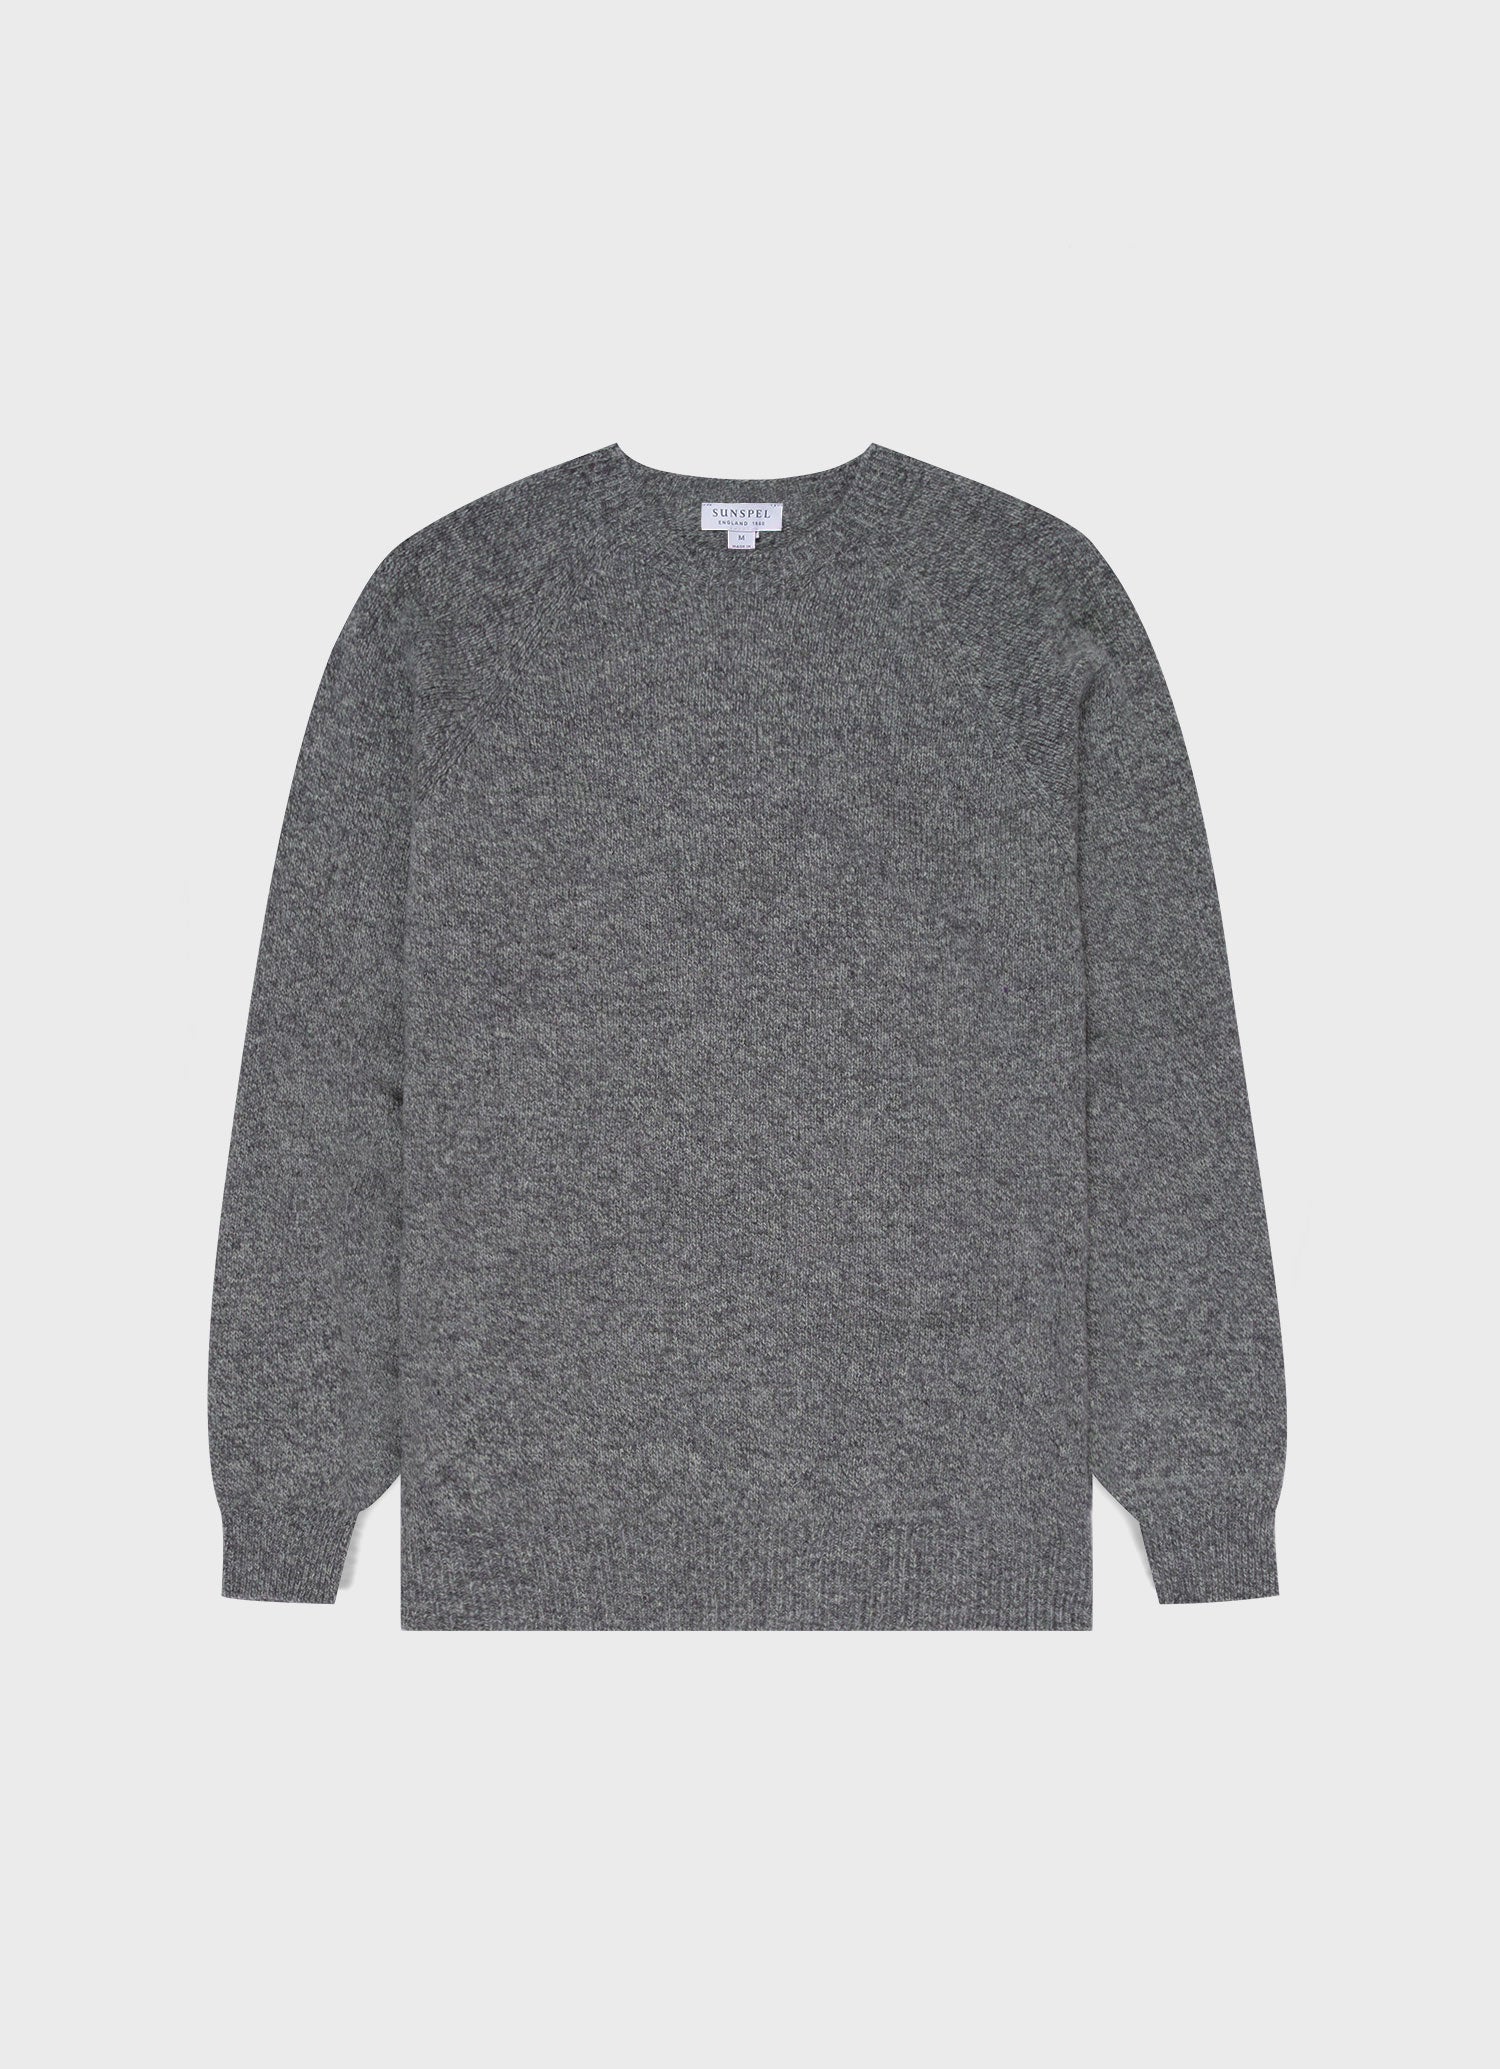 Men's Ombre Speckle Crew Neck Knitted Jumper